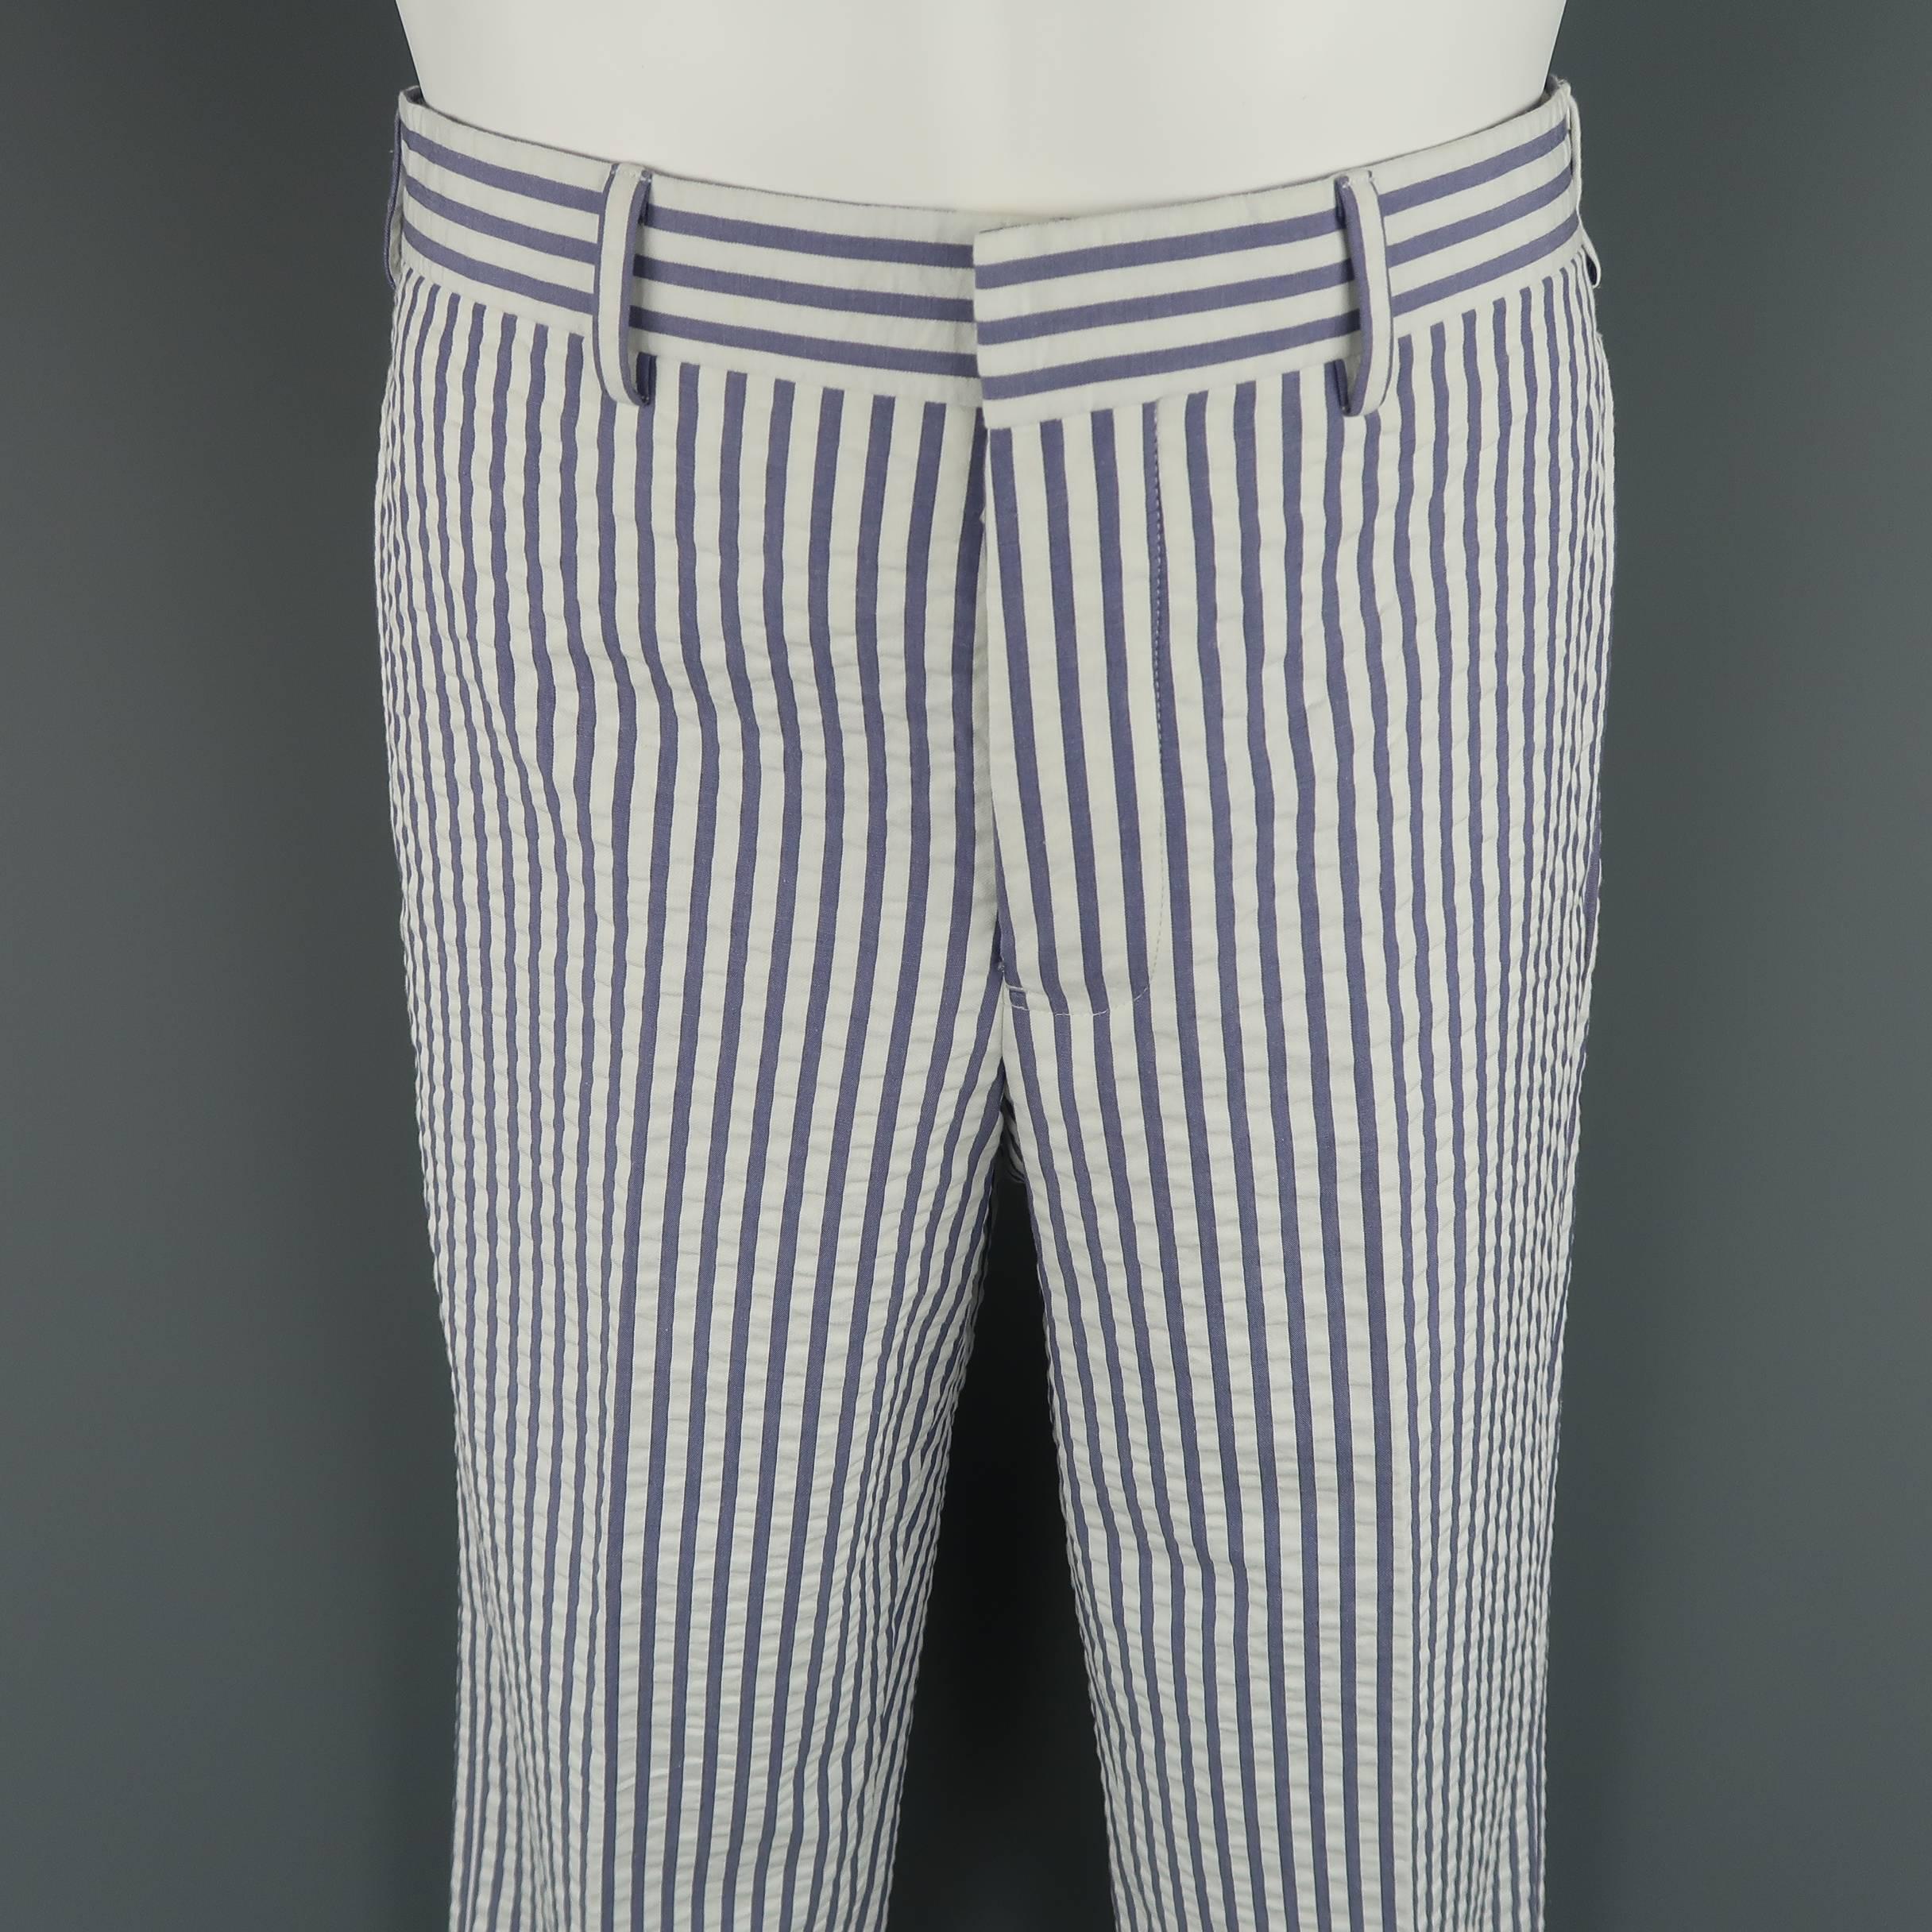 Flat front BLACK FLEECE dress pants come in white and blue striped textured cotton fabric with a classic fit and cuffed hem.
 
Excellent Pre-Owned Condition.
Marked: BB0
 
Measurements:
 
Waist: 30 in. (+ 2 in. )
Rise: 10 in.
Inseam: 30 in.
 
(Let